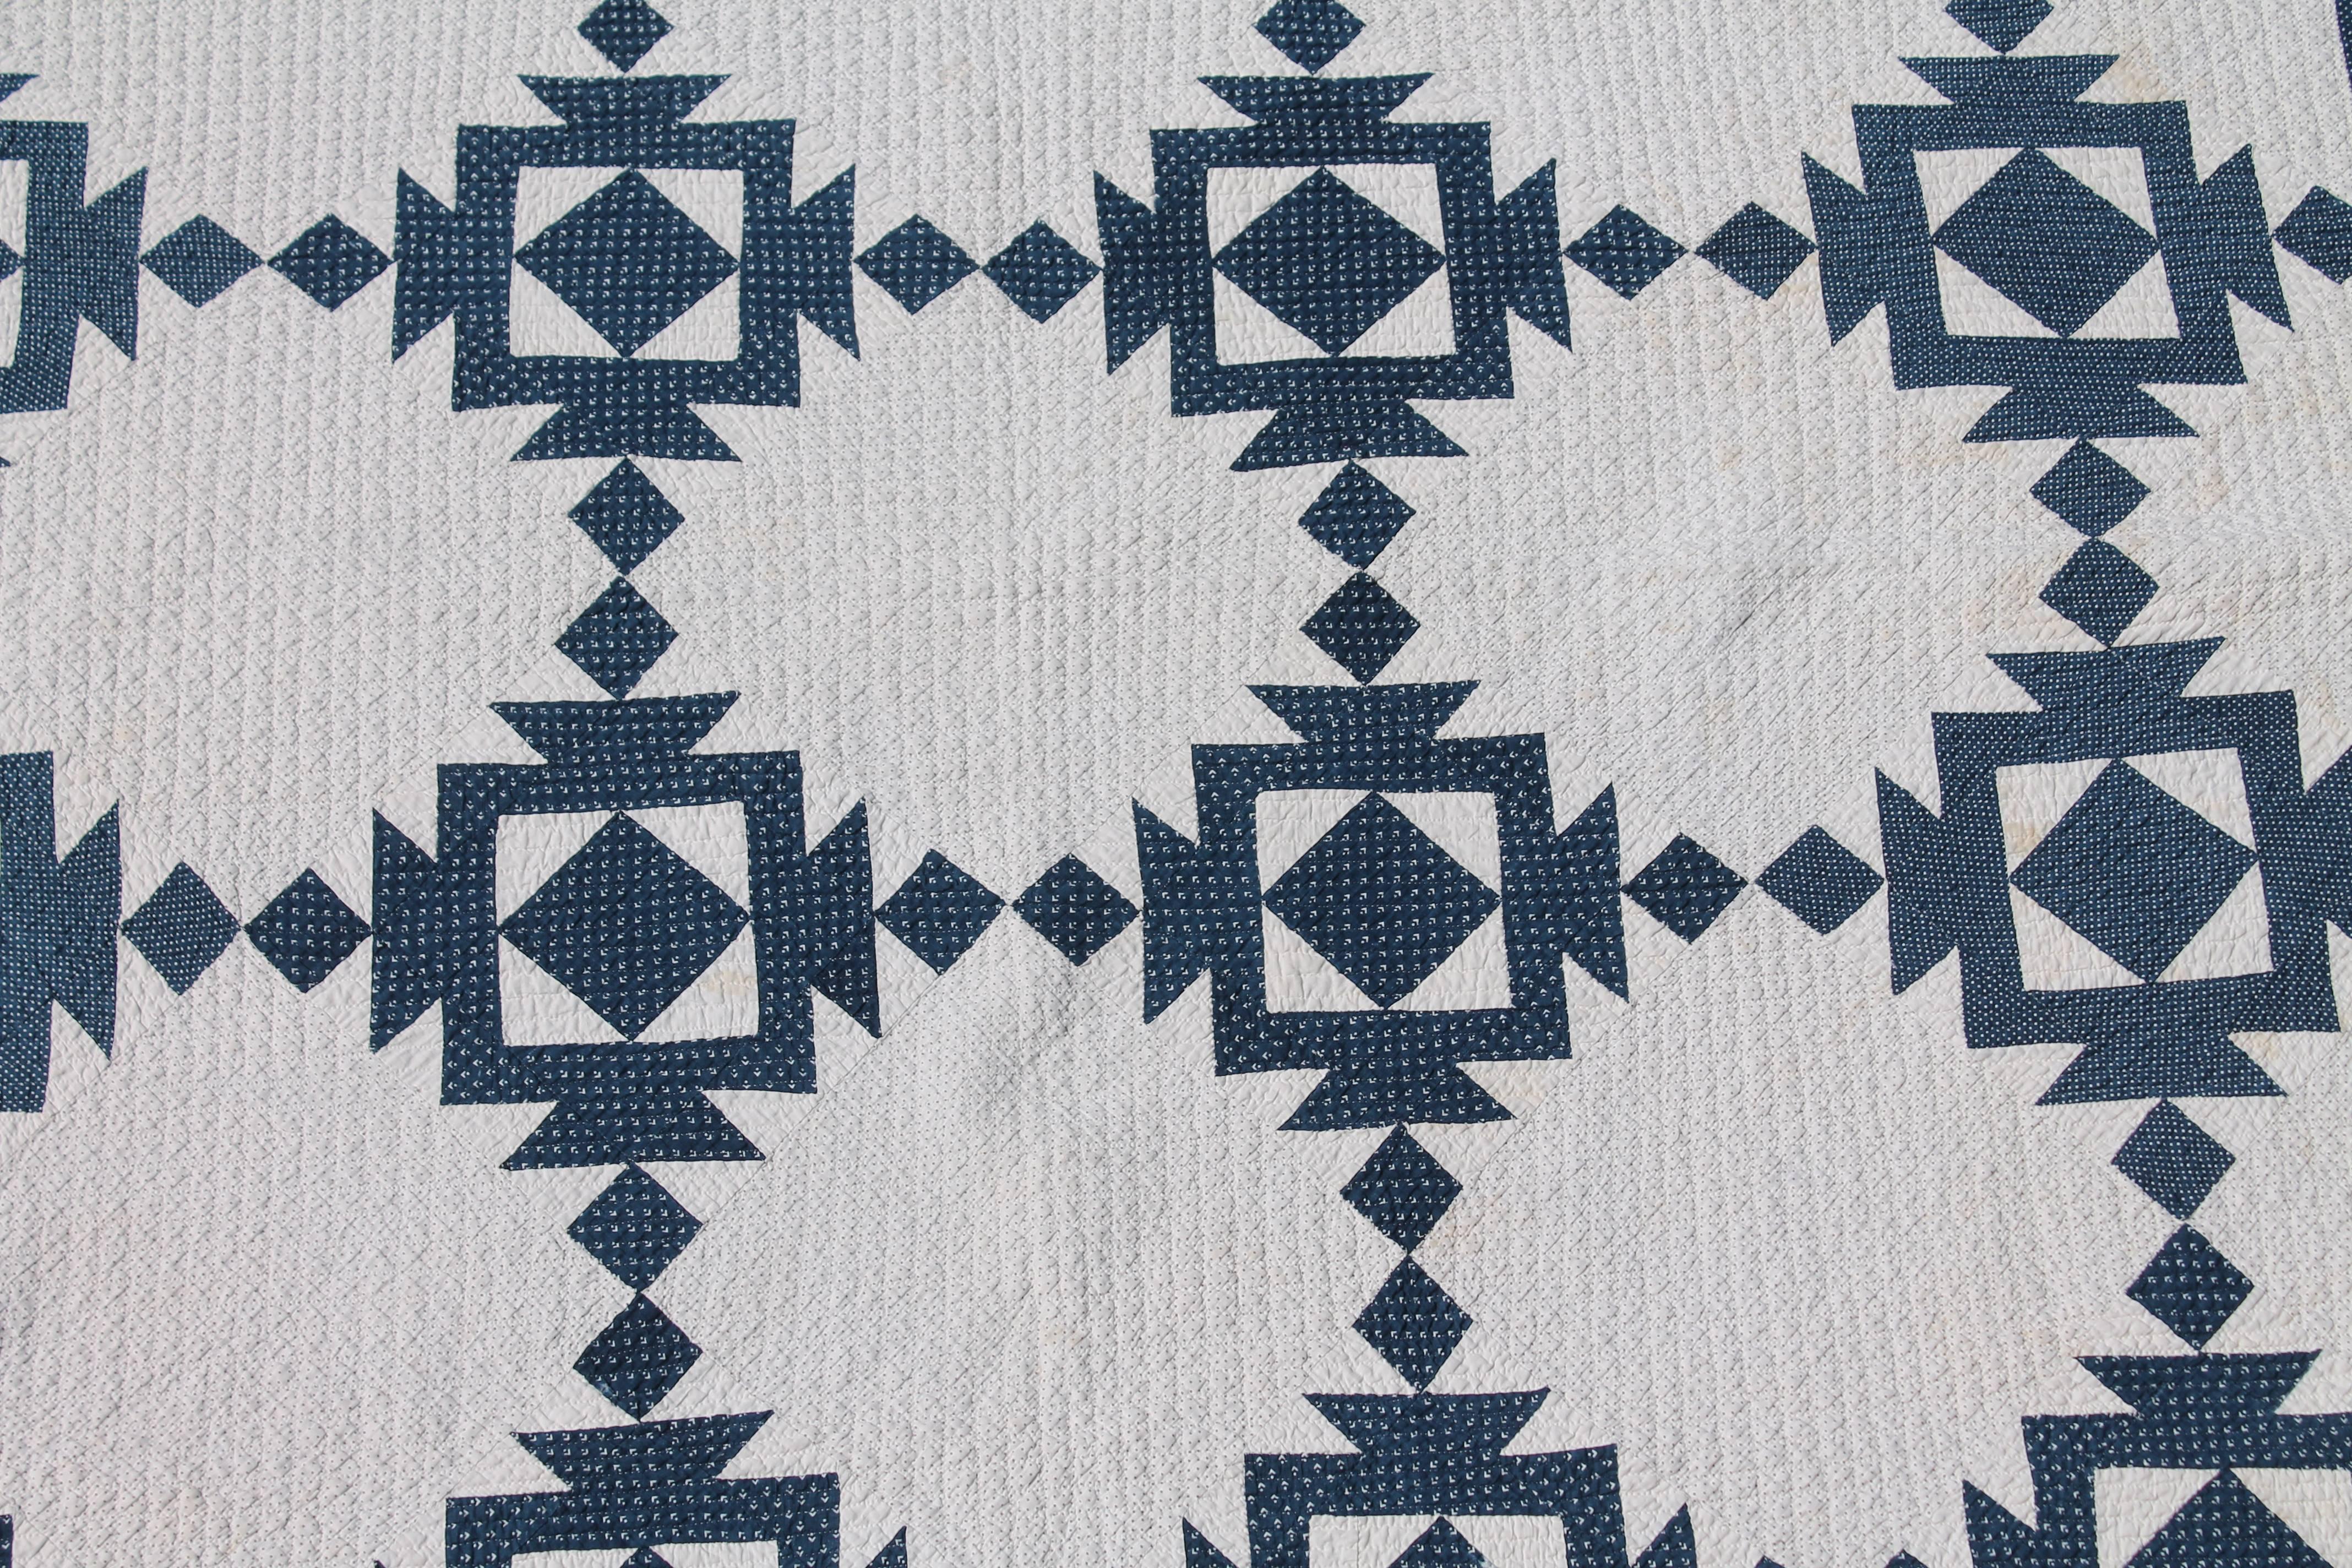 This finely quilted blue and white geometric quilt was found in Pennsylvania and is in very good condition. There is minor age spots the size of a pin head but no tears or damages.